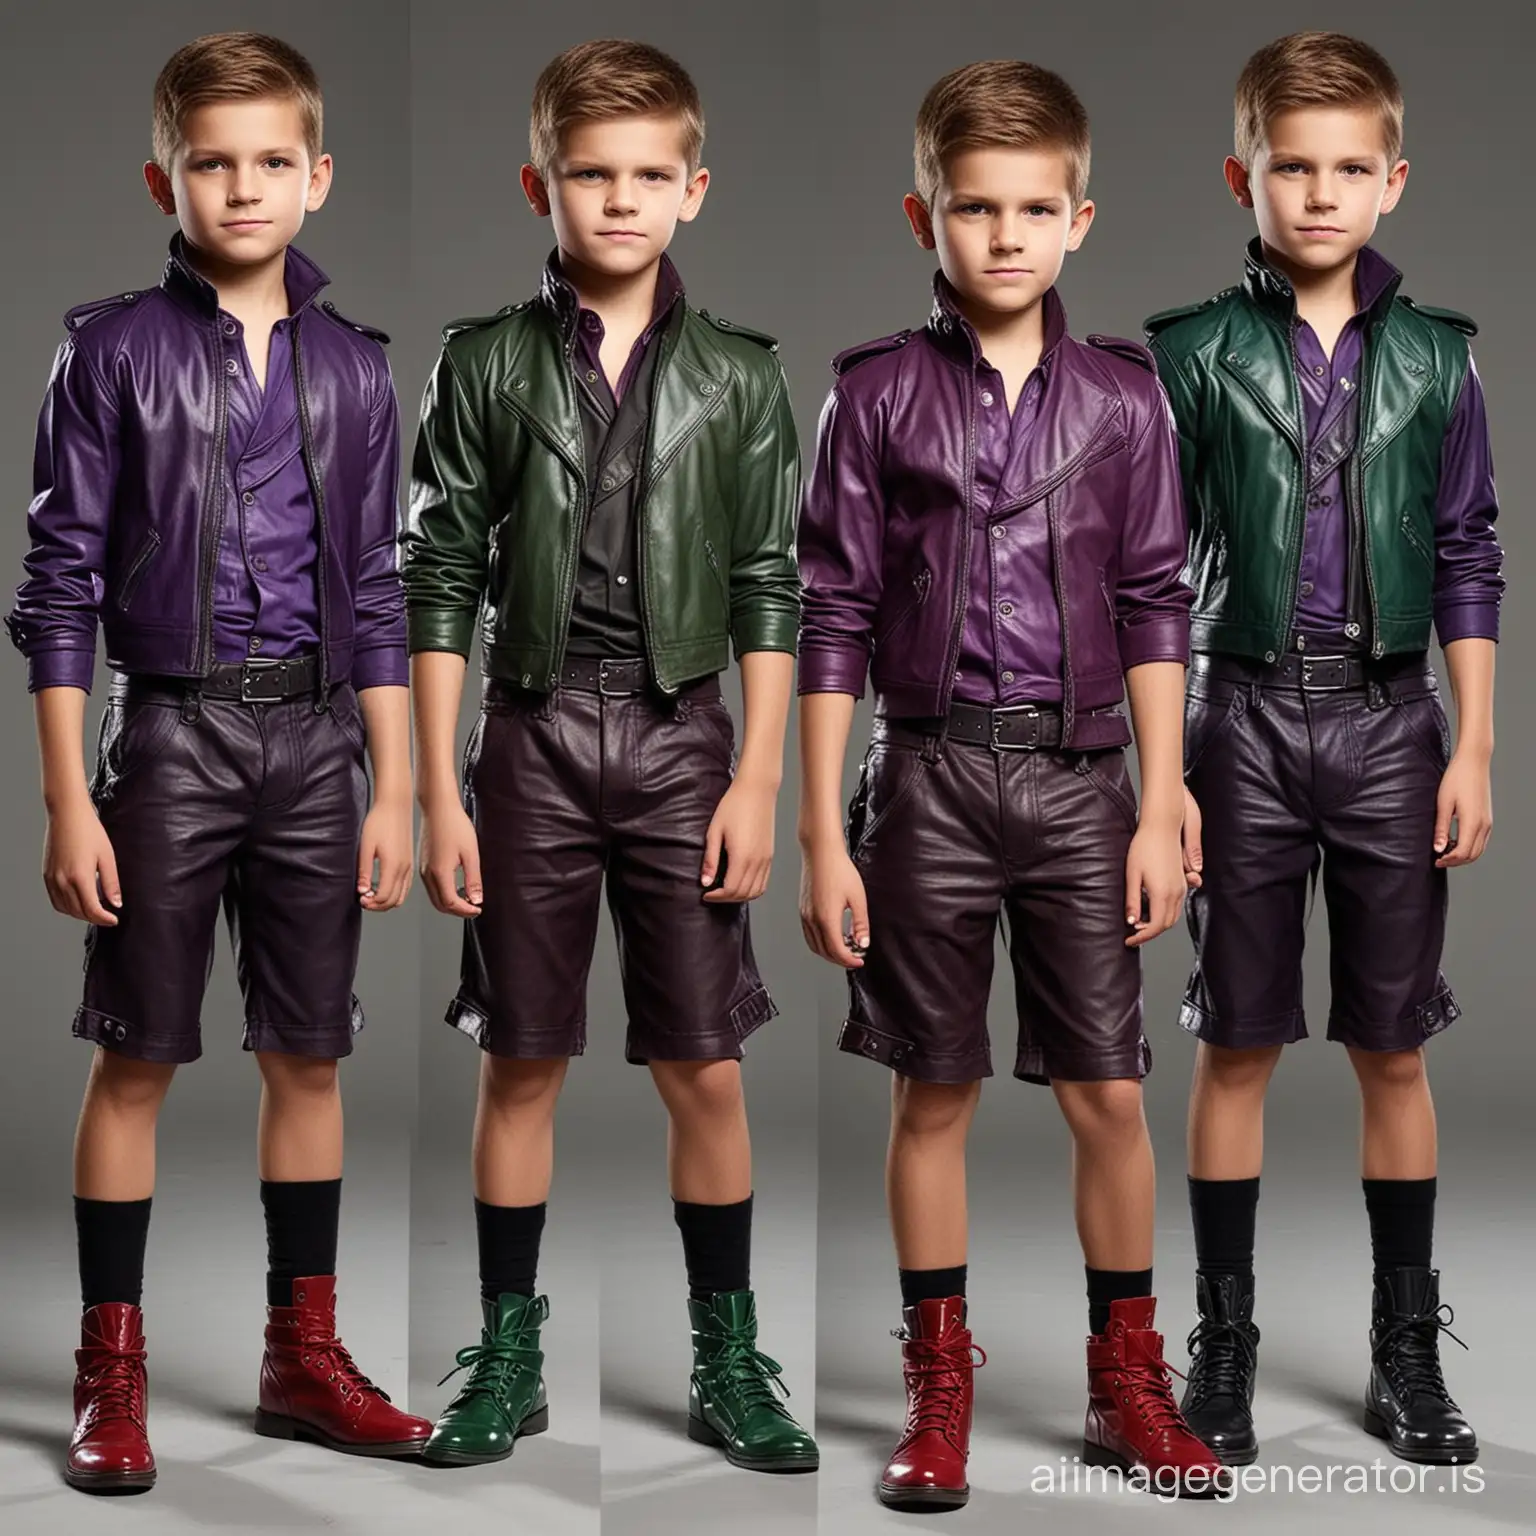 Intimidating-8YearOld-Boy-Villain-in-Comfortable-Leather-Outfit-with-Purple-and-Green-Highlights